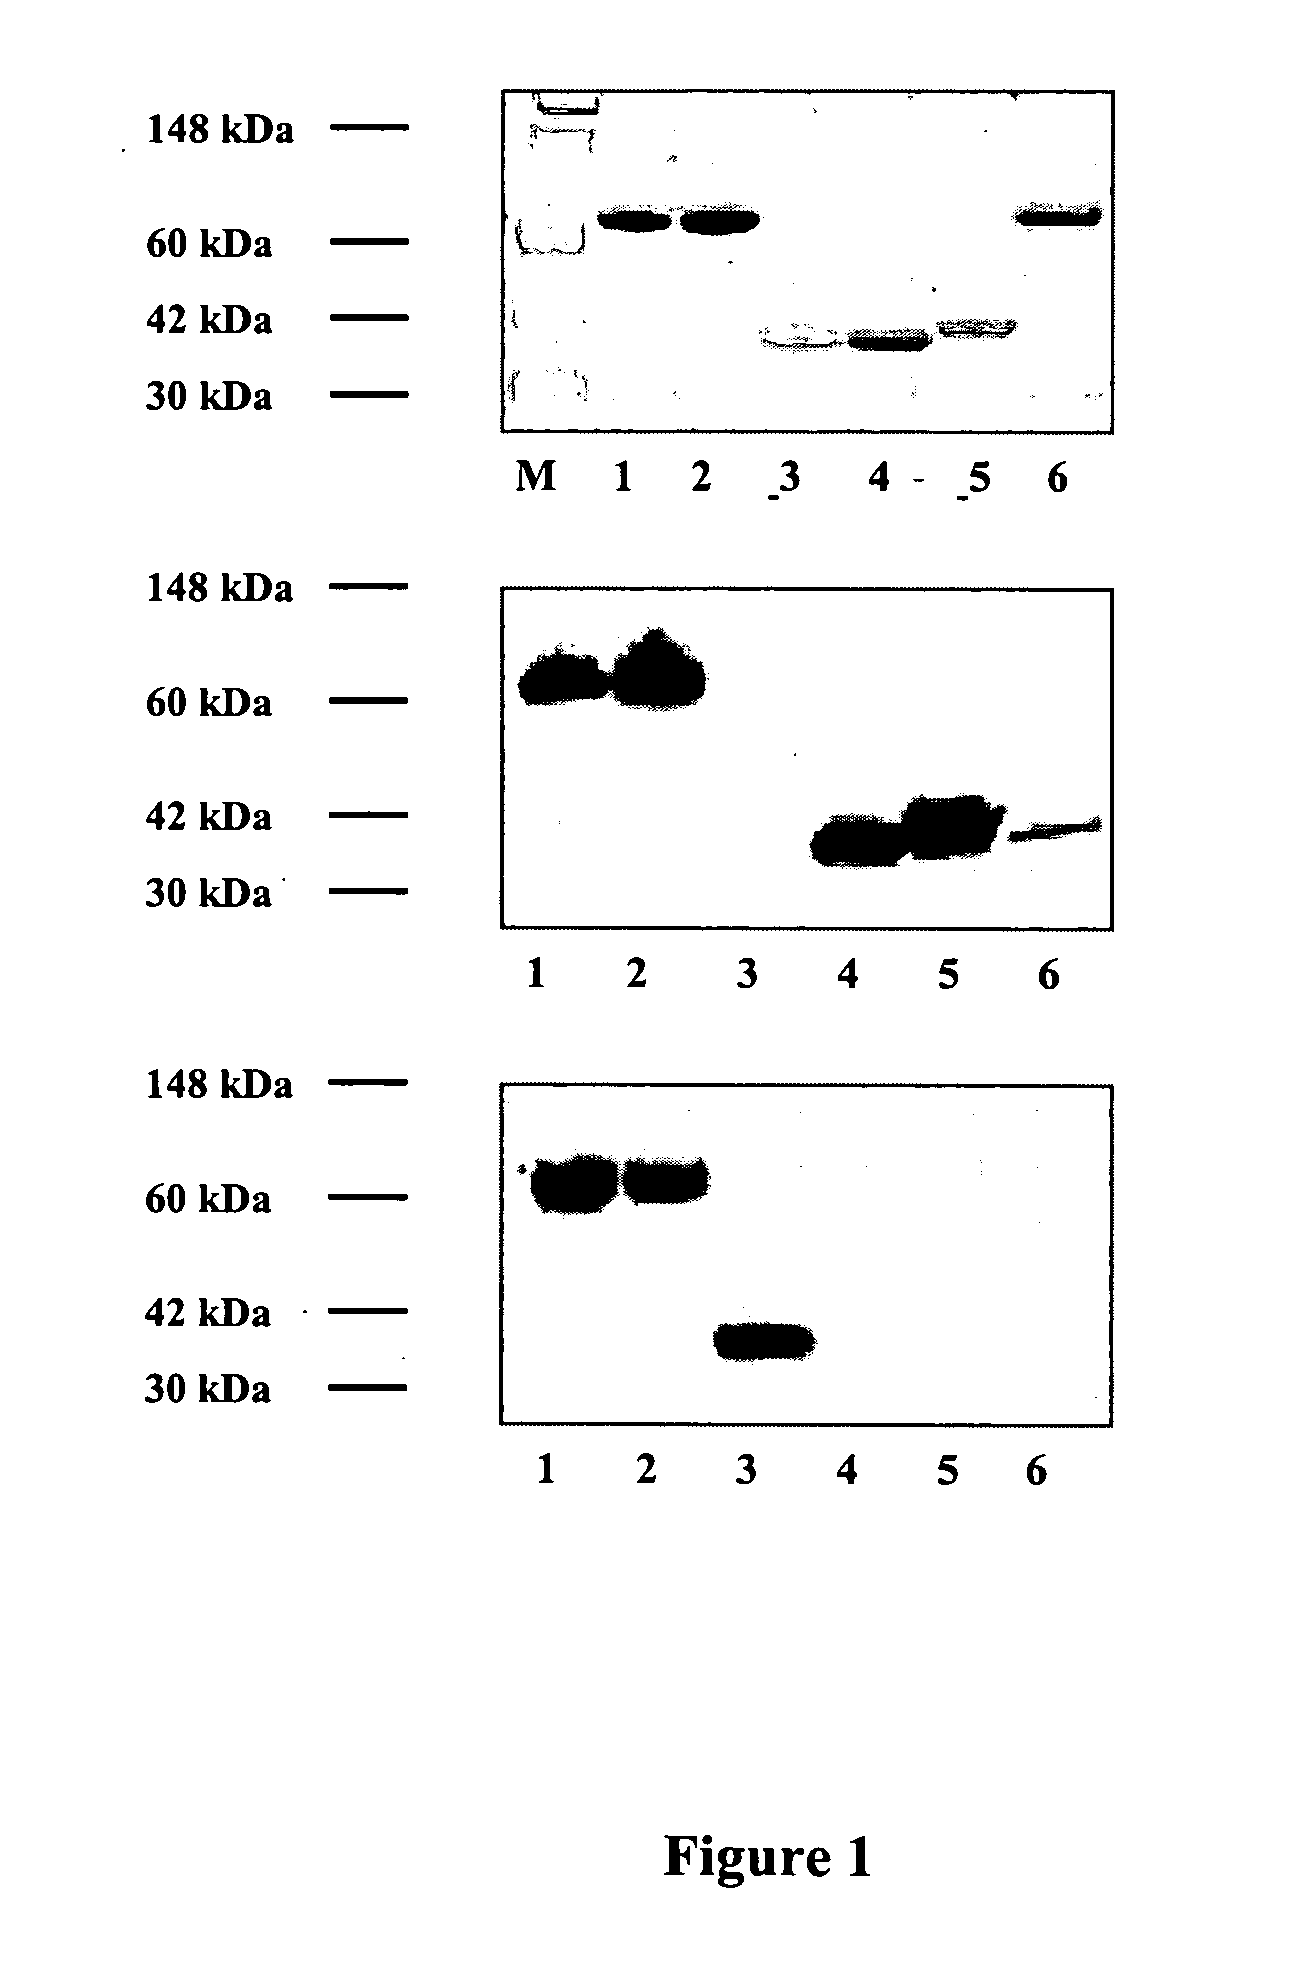 Chimeric proteins with phosphatidylserine binding domains